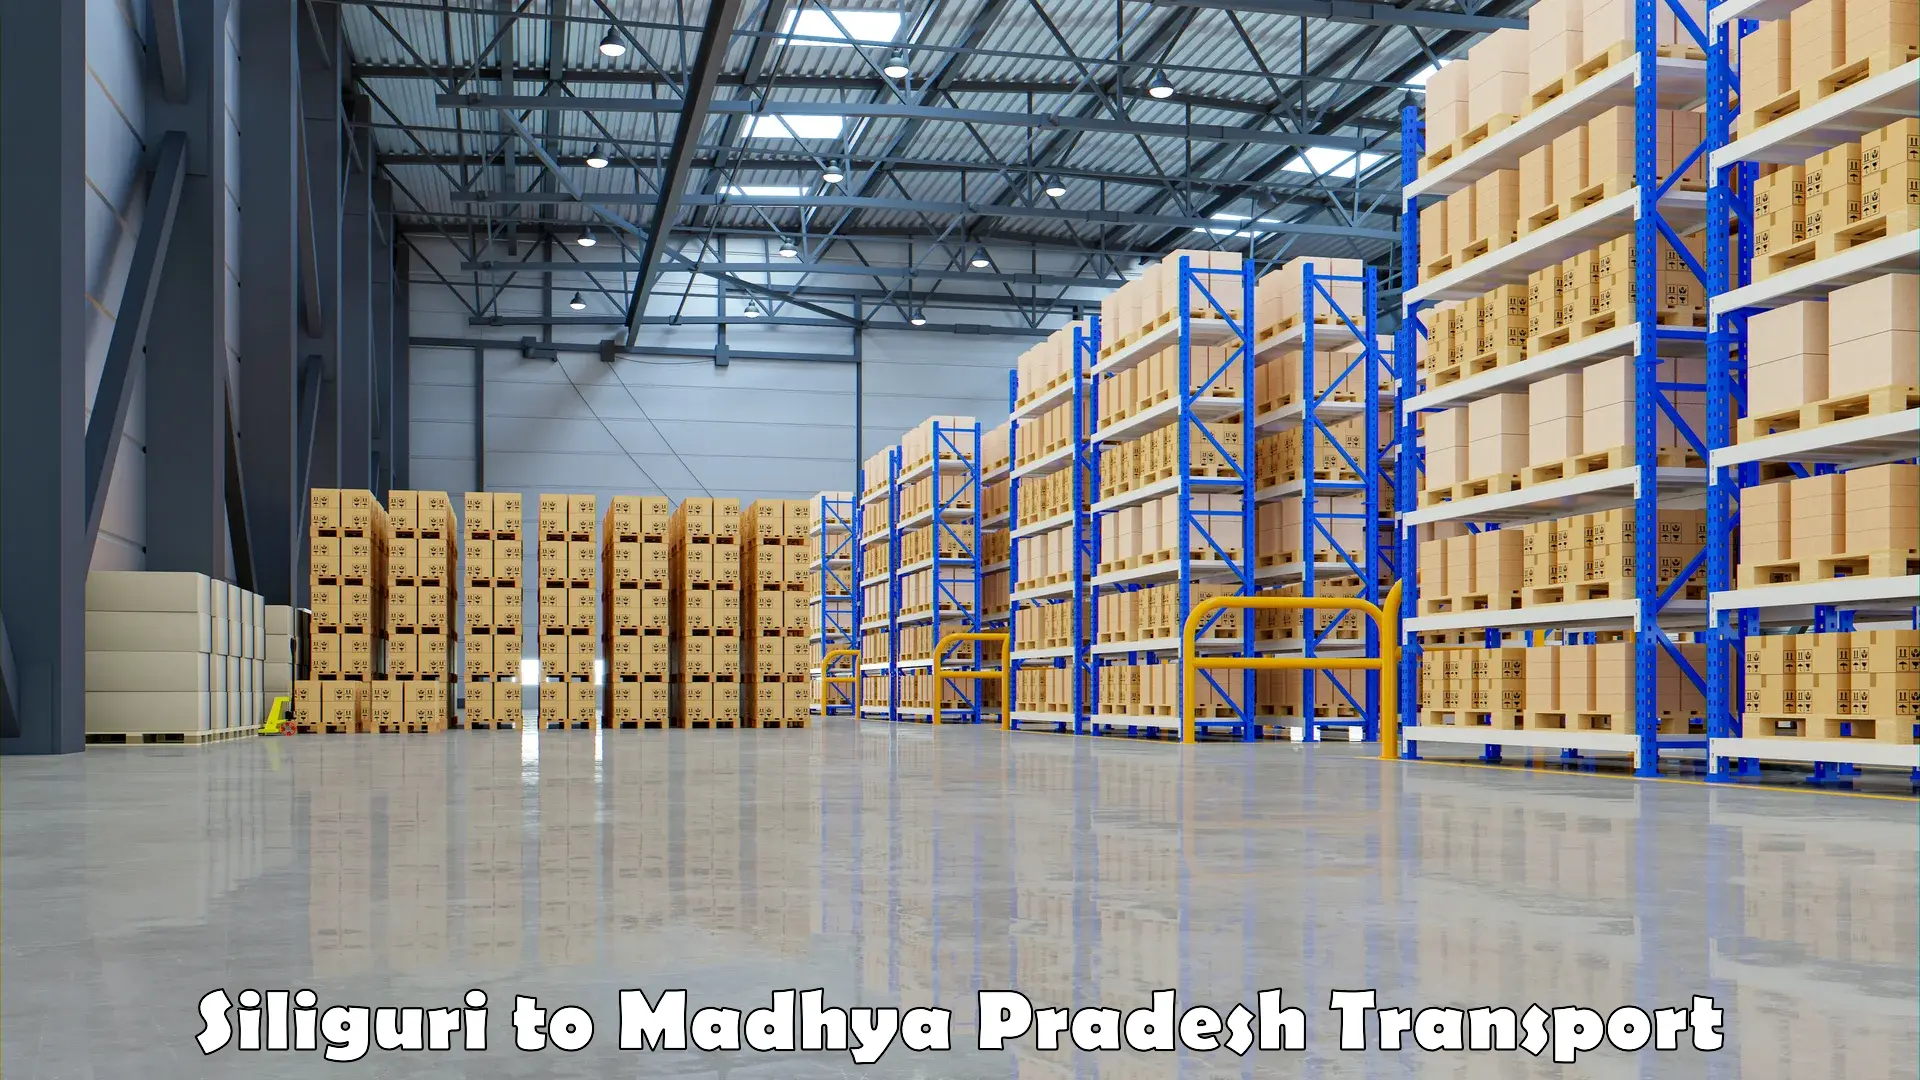 Land transport services Siliguri to Bhopal